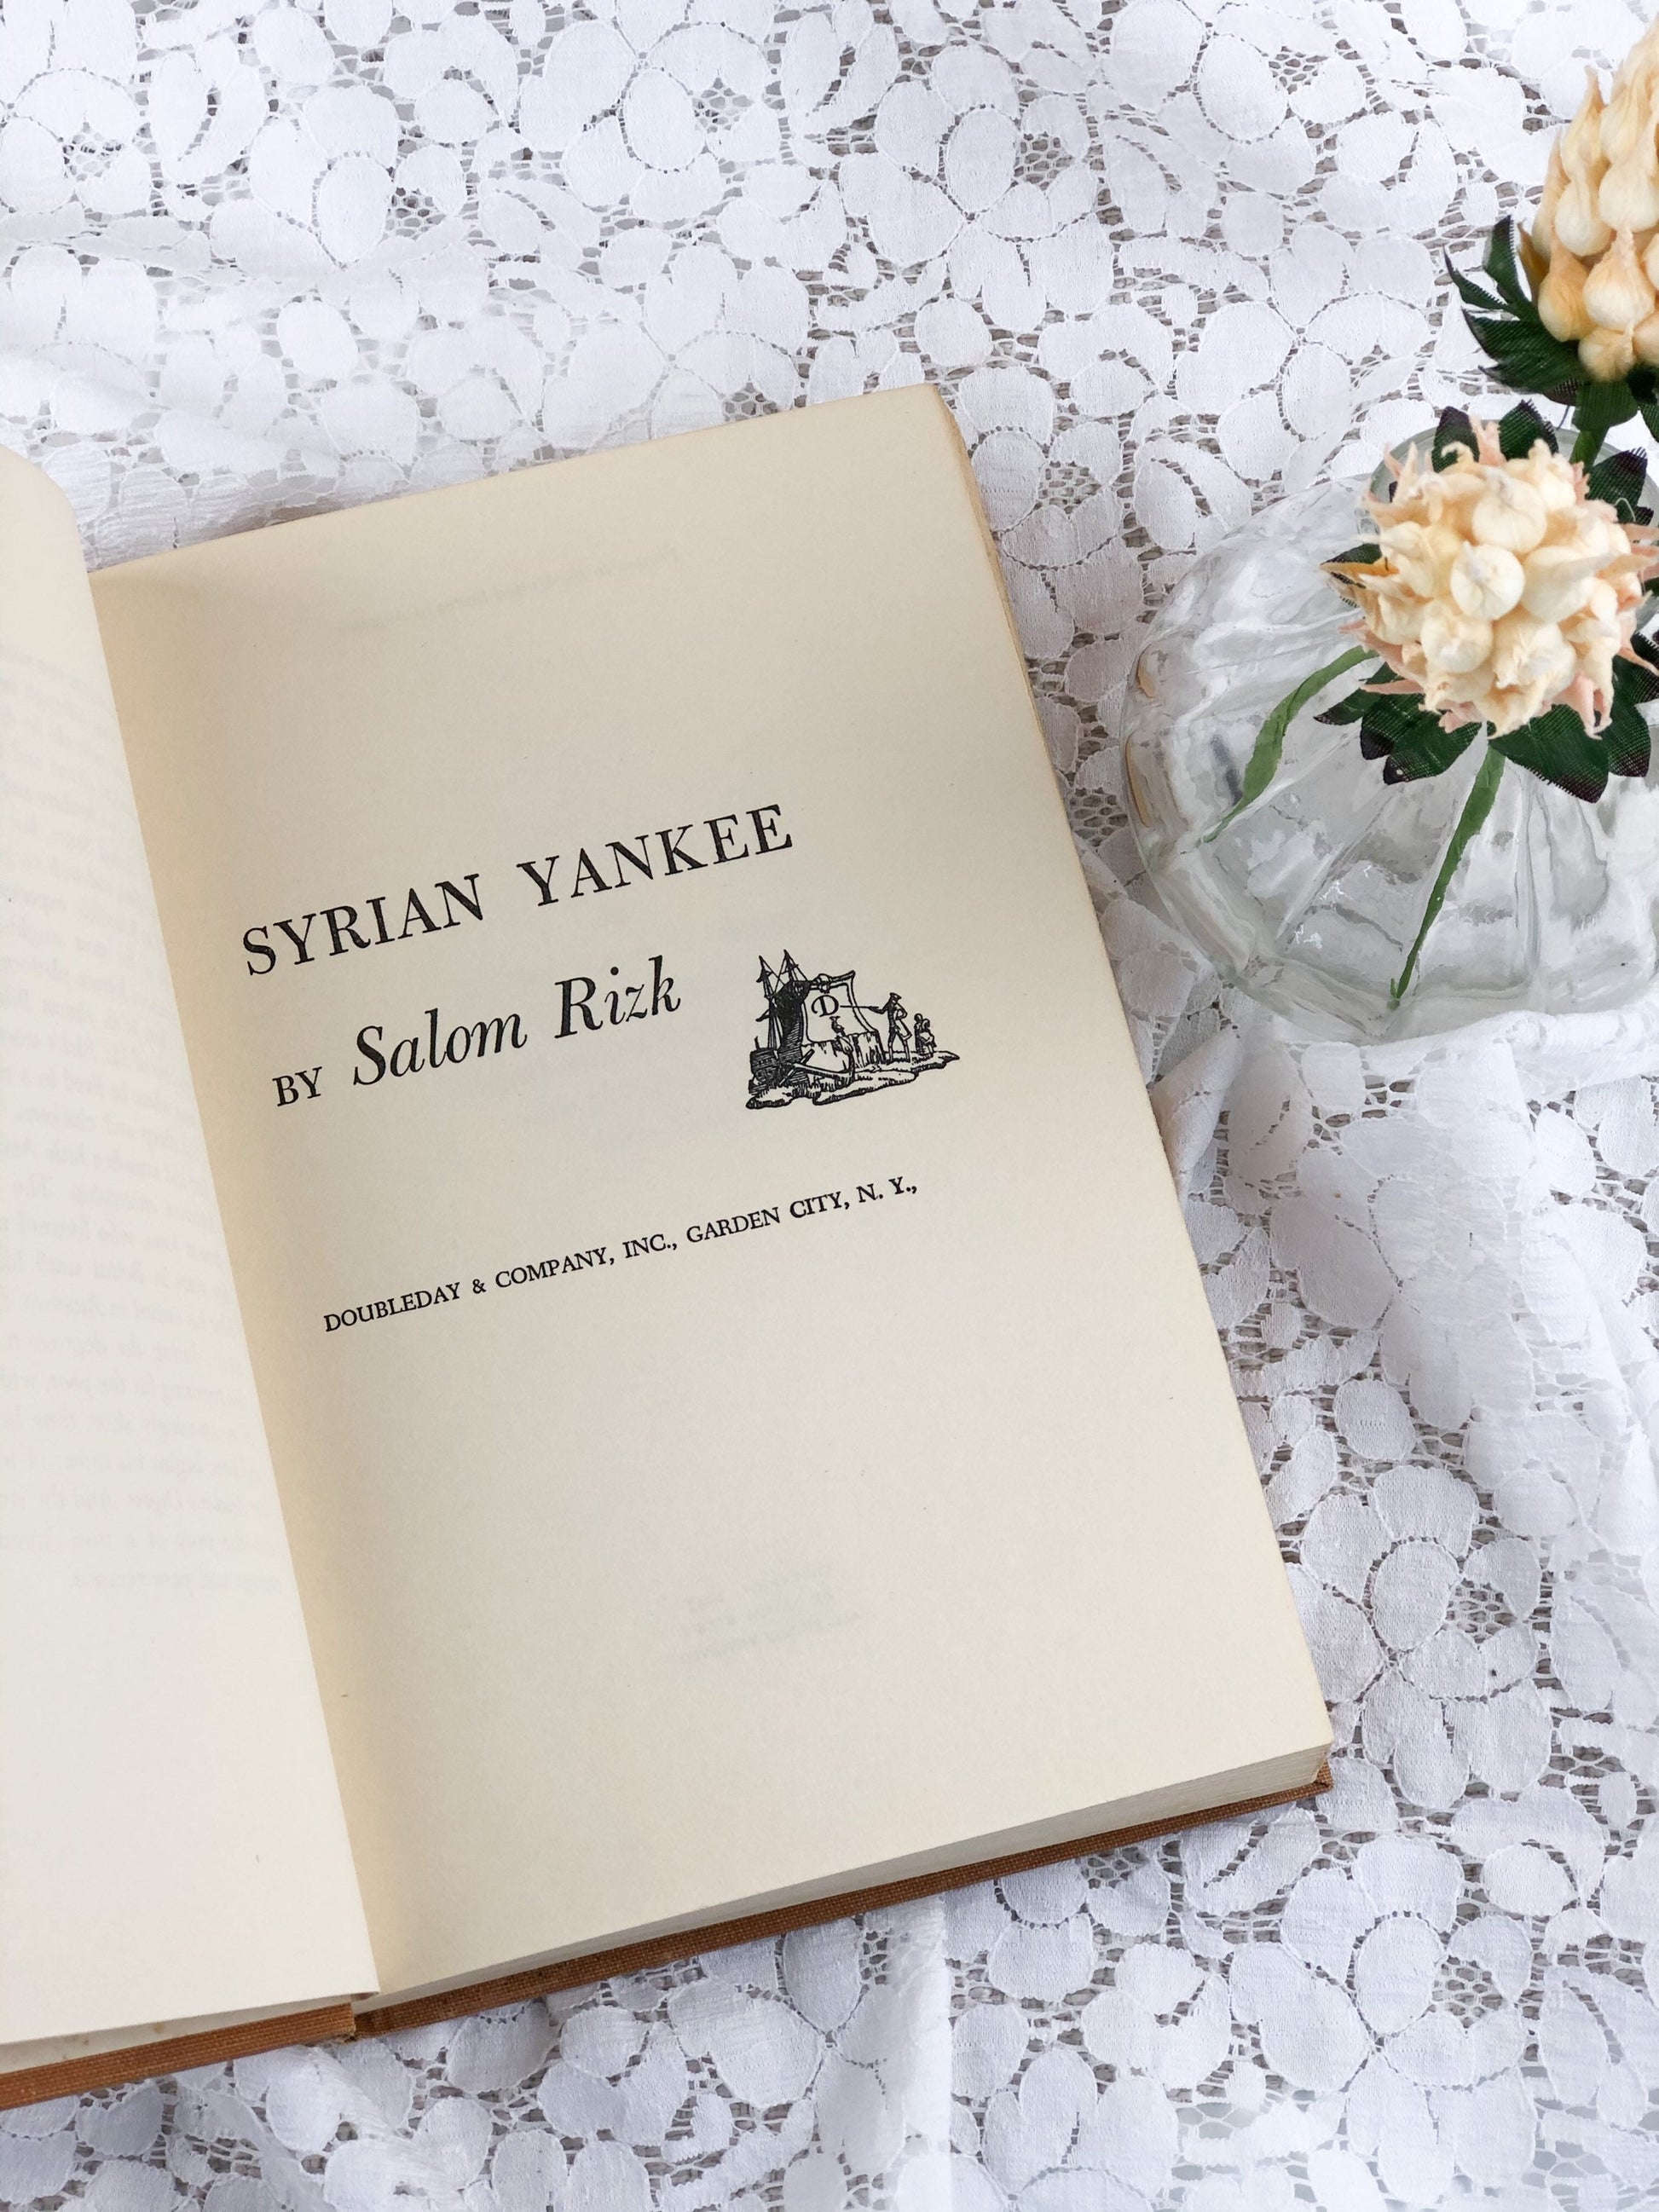 Signed Syrian Yankee by Salom Rizk